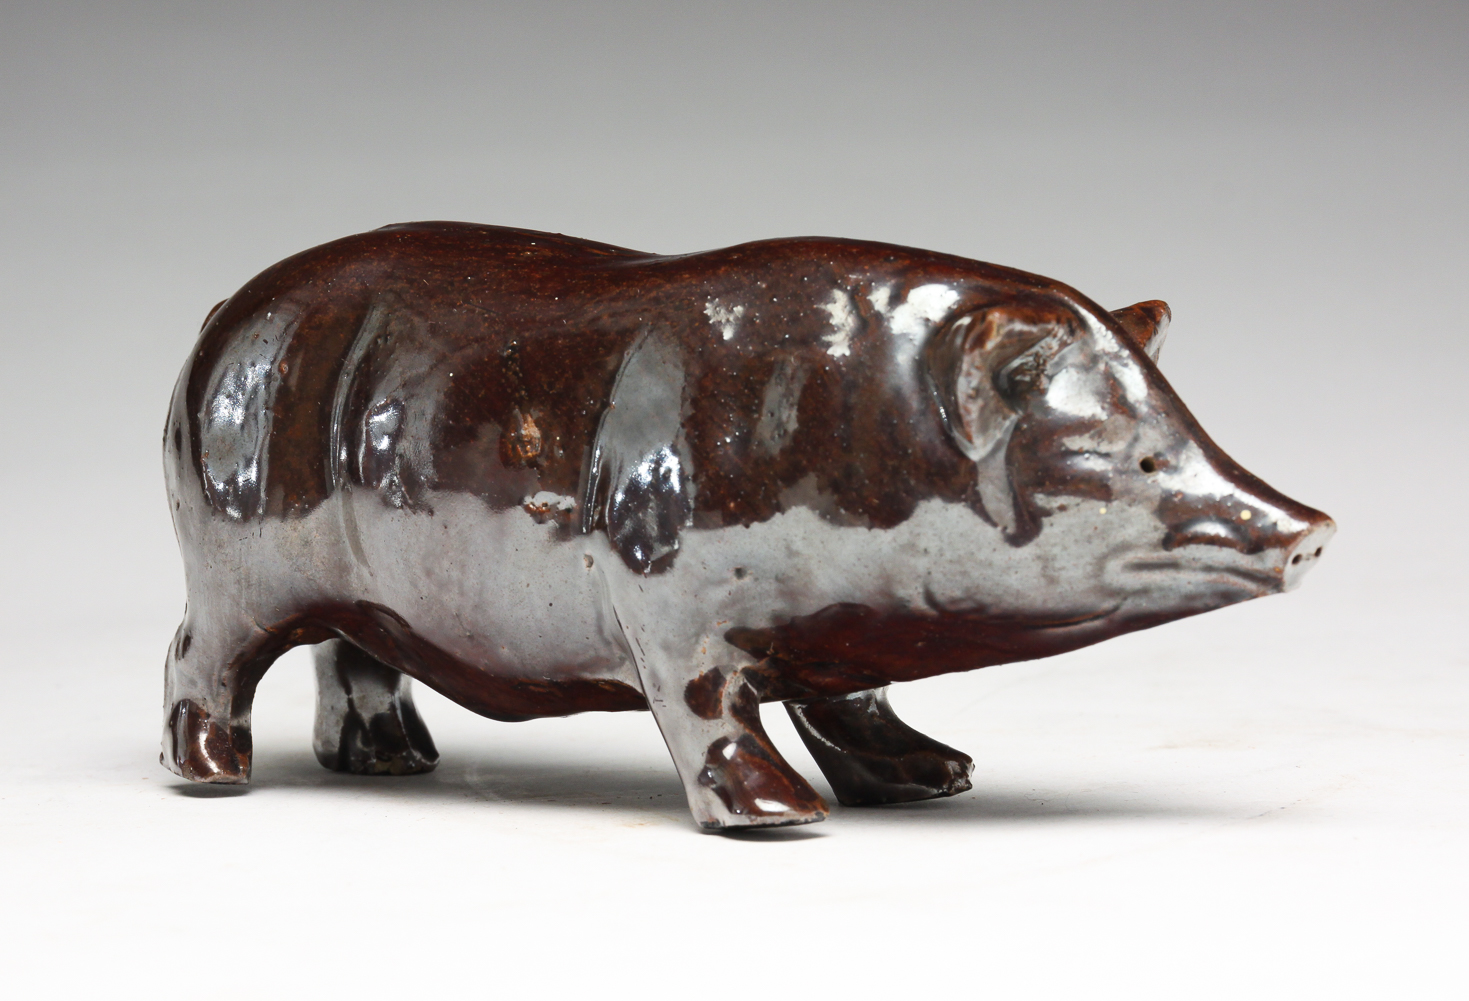 AMERICAN POTTERY PIG. Second half-19th